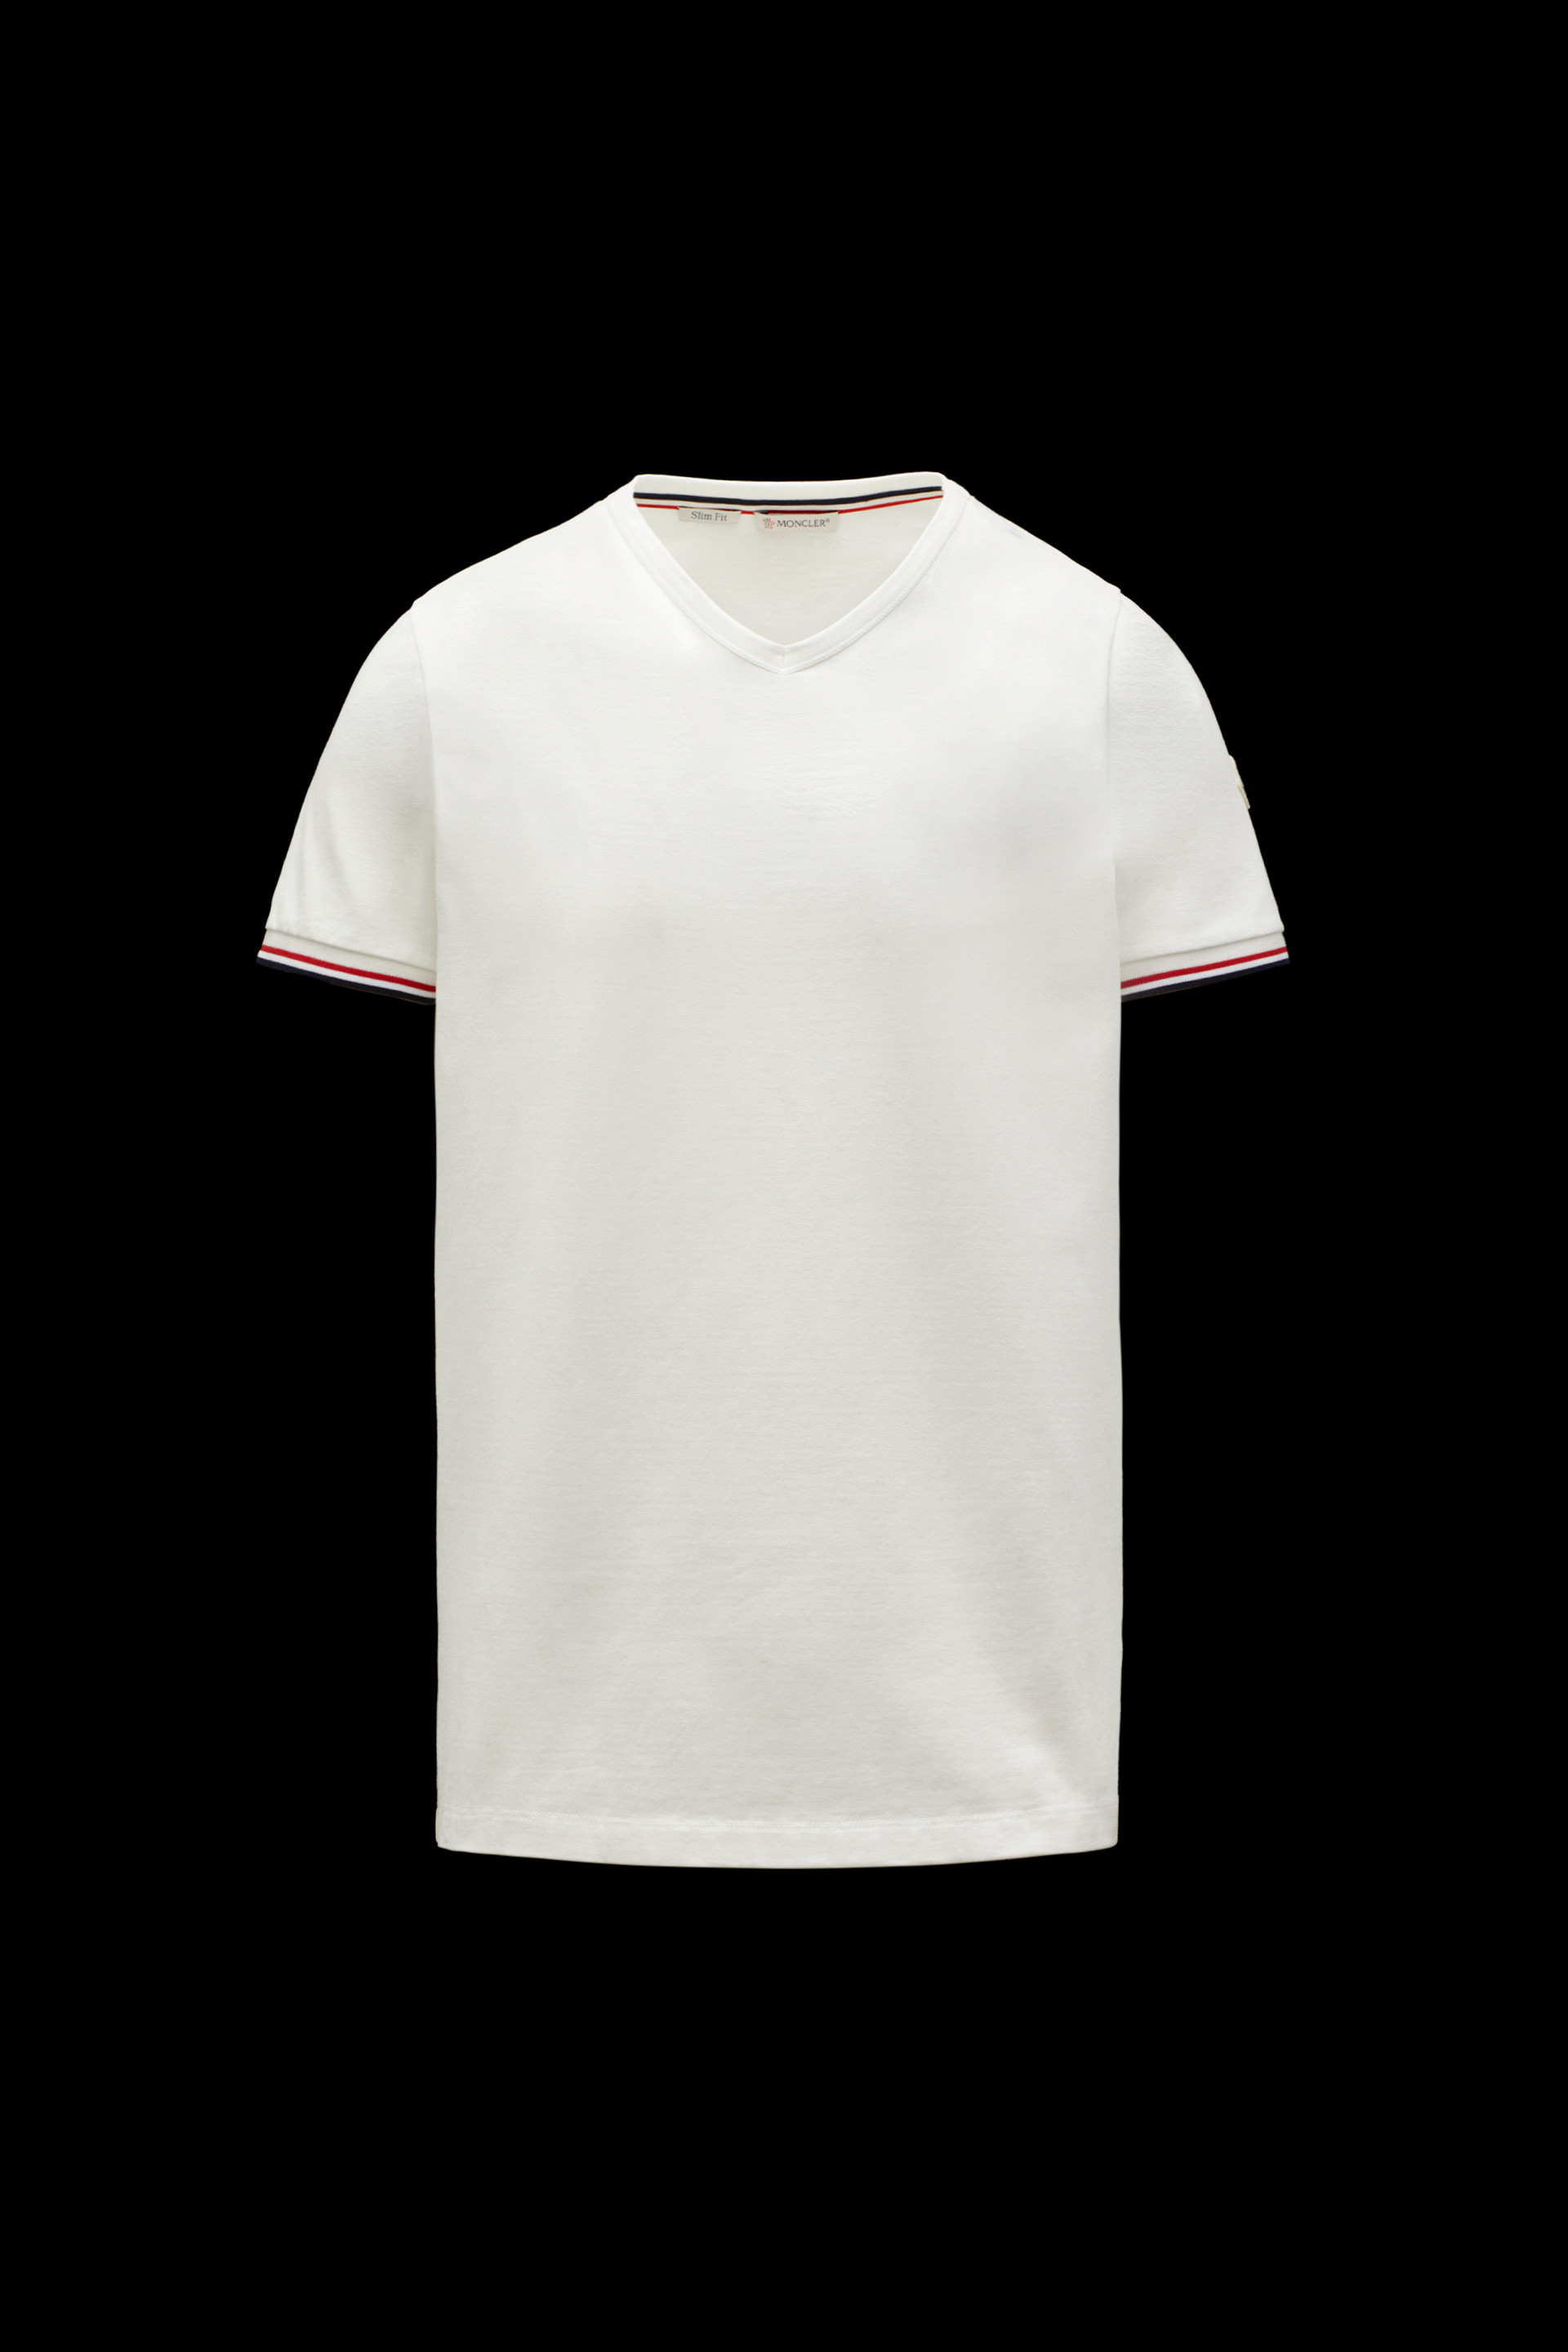 Moncler X Off White T Shirt Flash Sales, 43% OFF | www.ilpungolo.org